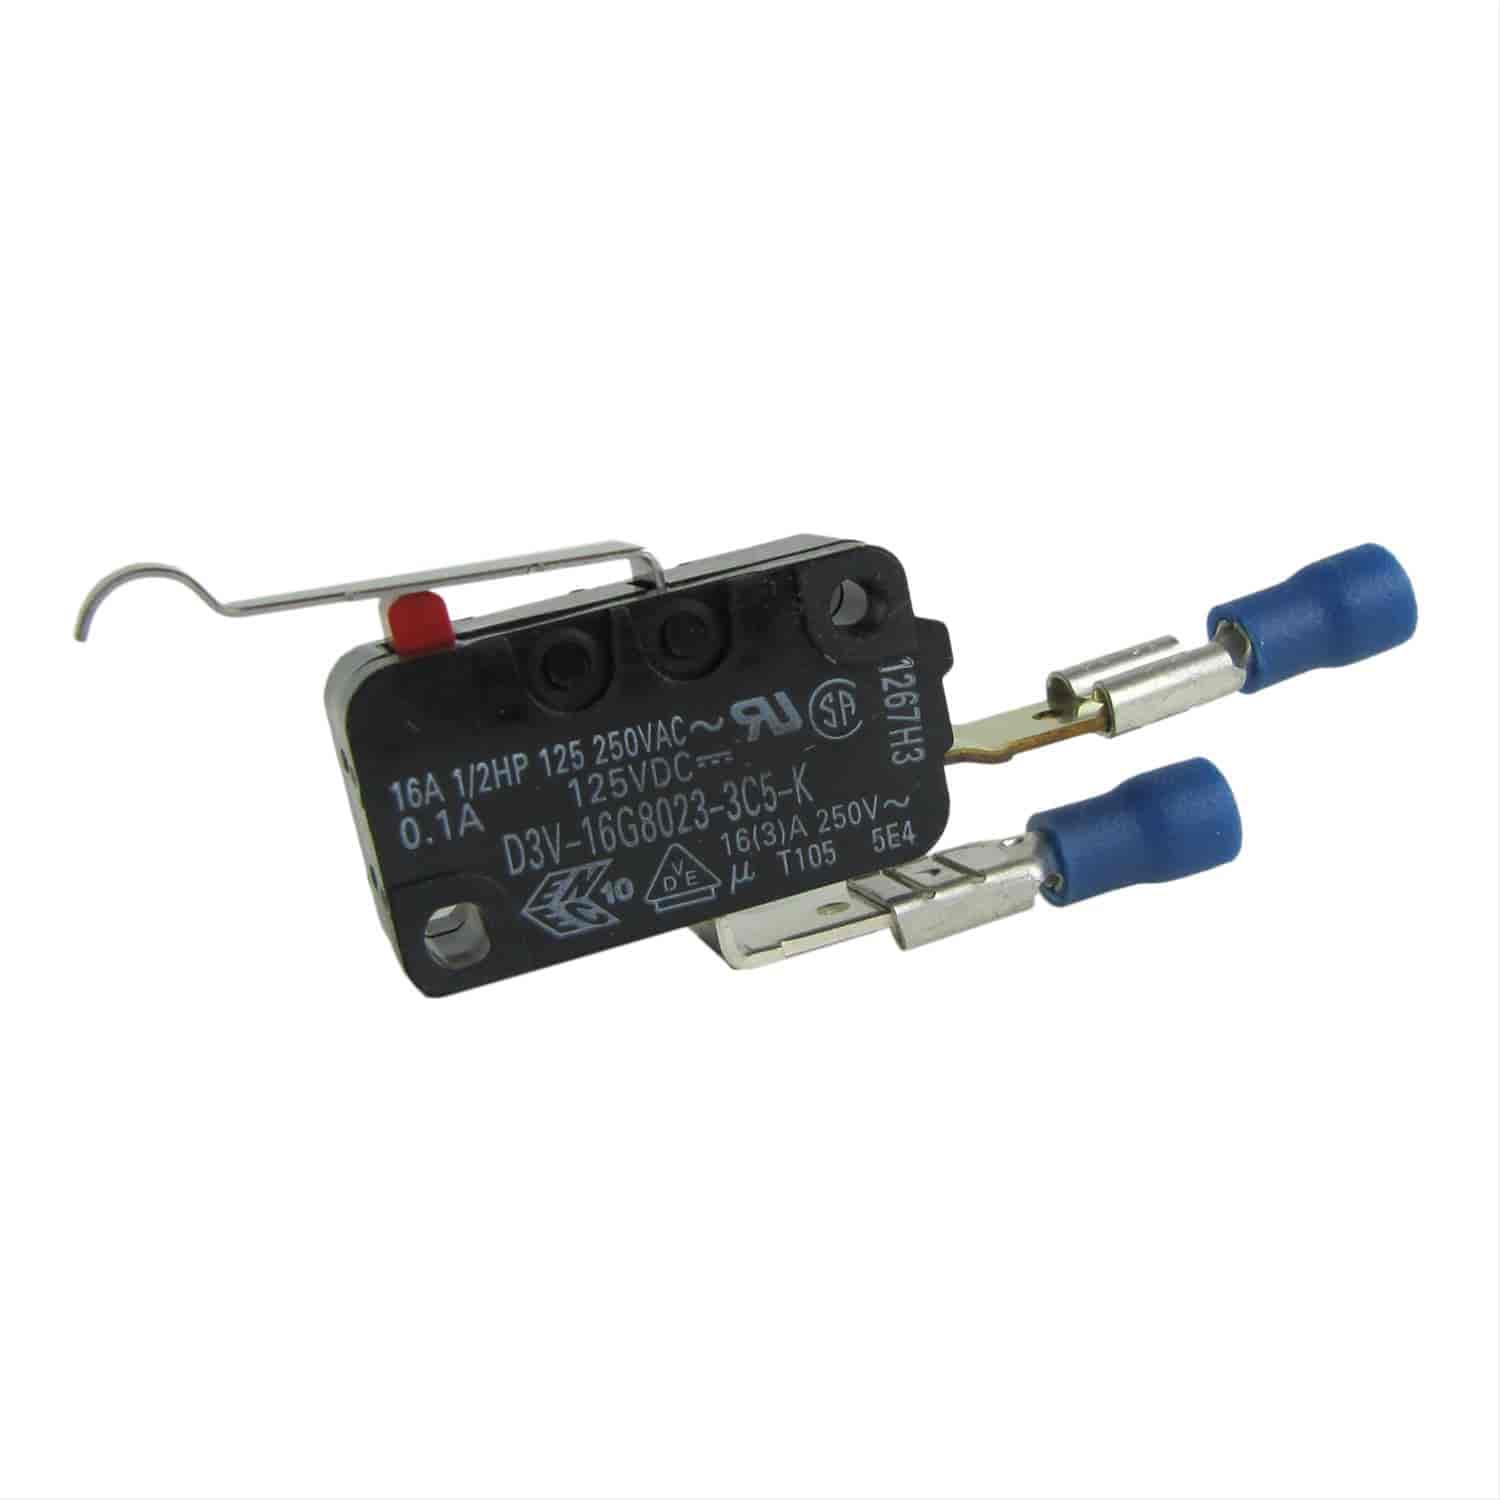 Replacement Micro Switch For Use With Hammer, MegaShifter,